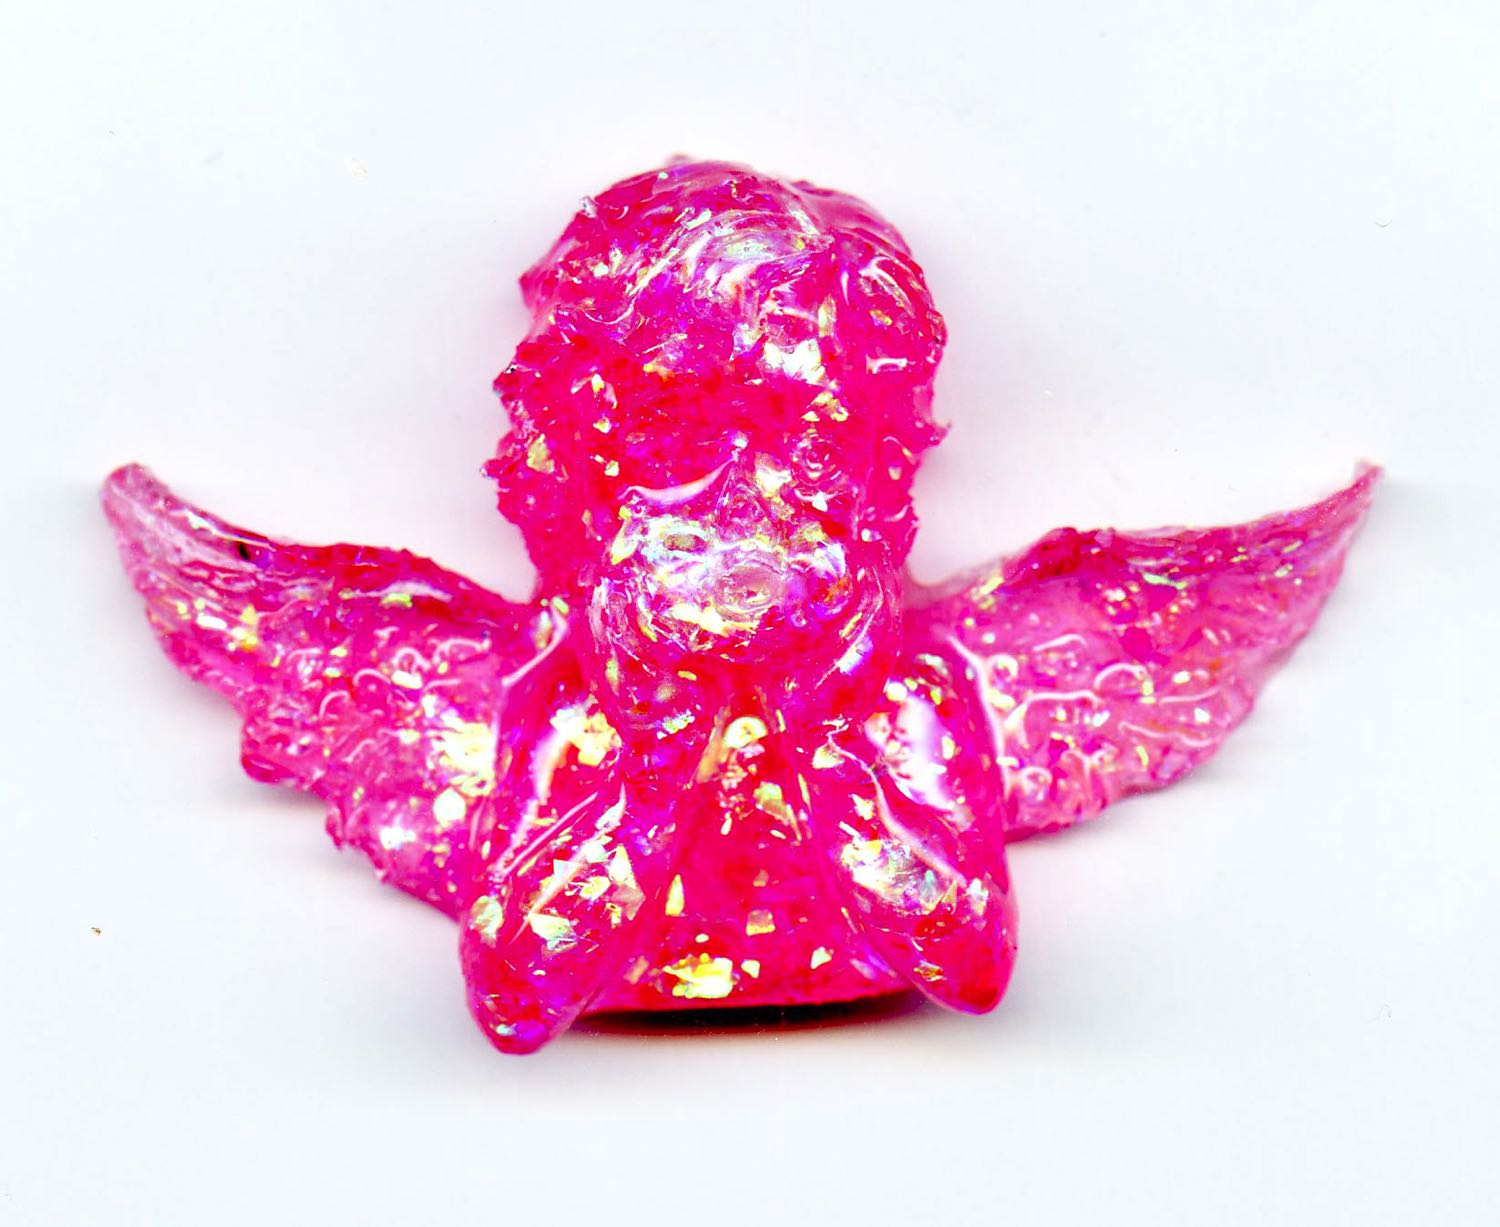 Image 06: Zara Sully, Angel sent to Jay Davies as part of 'Angel Exchange'.